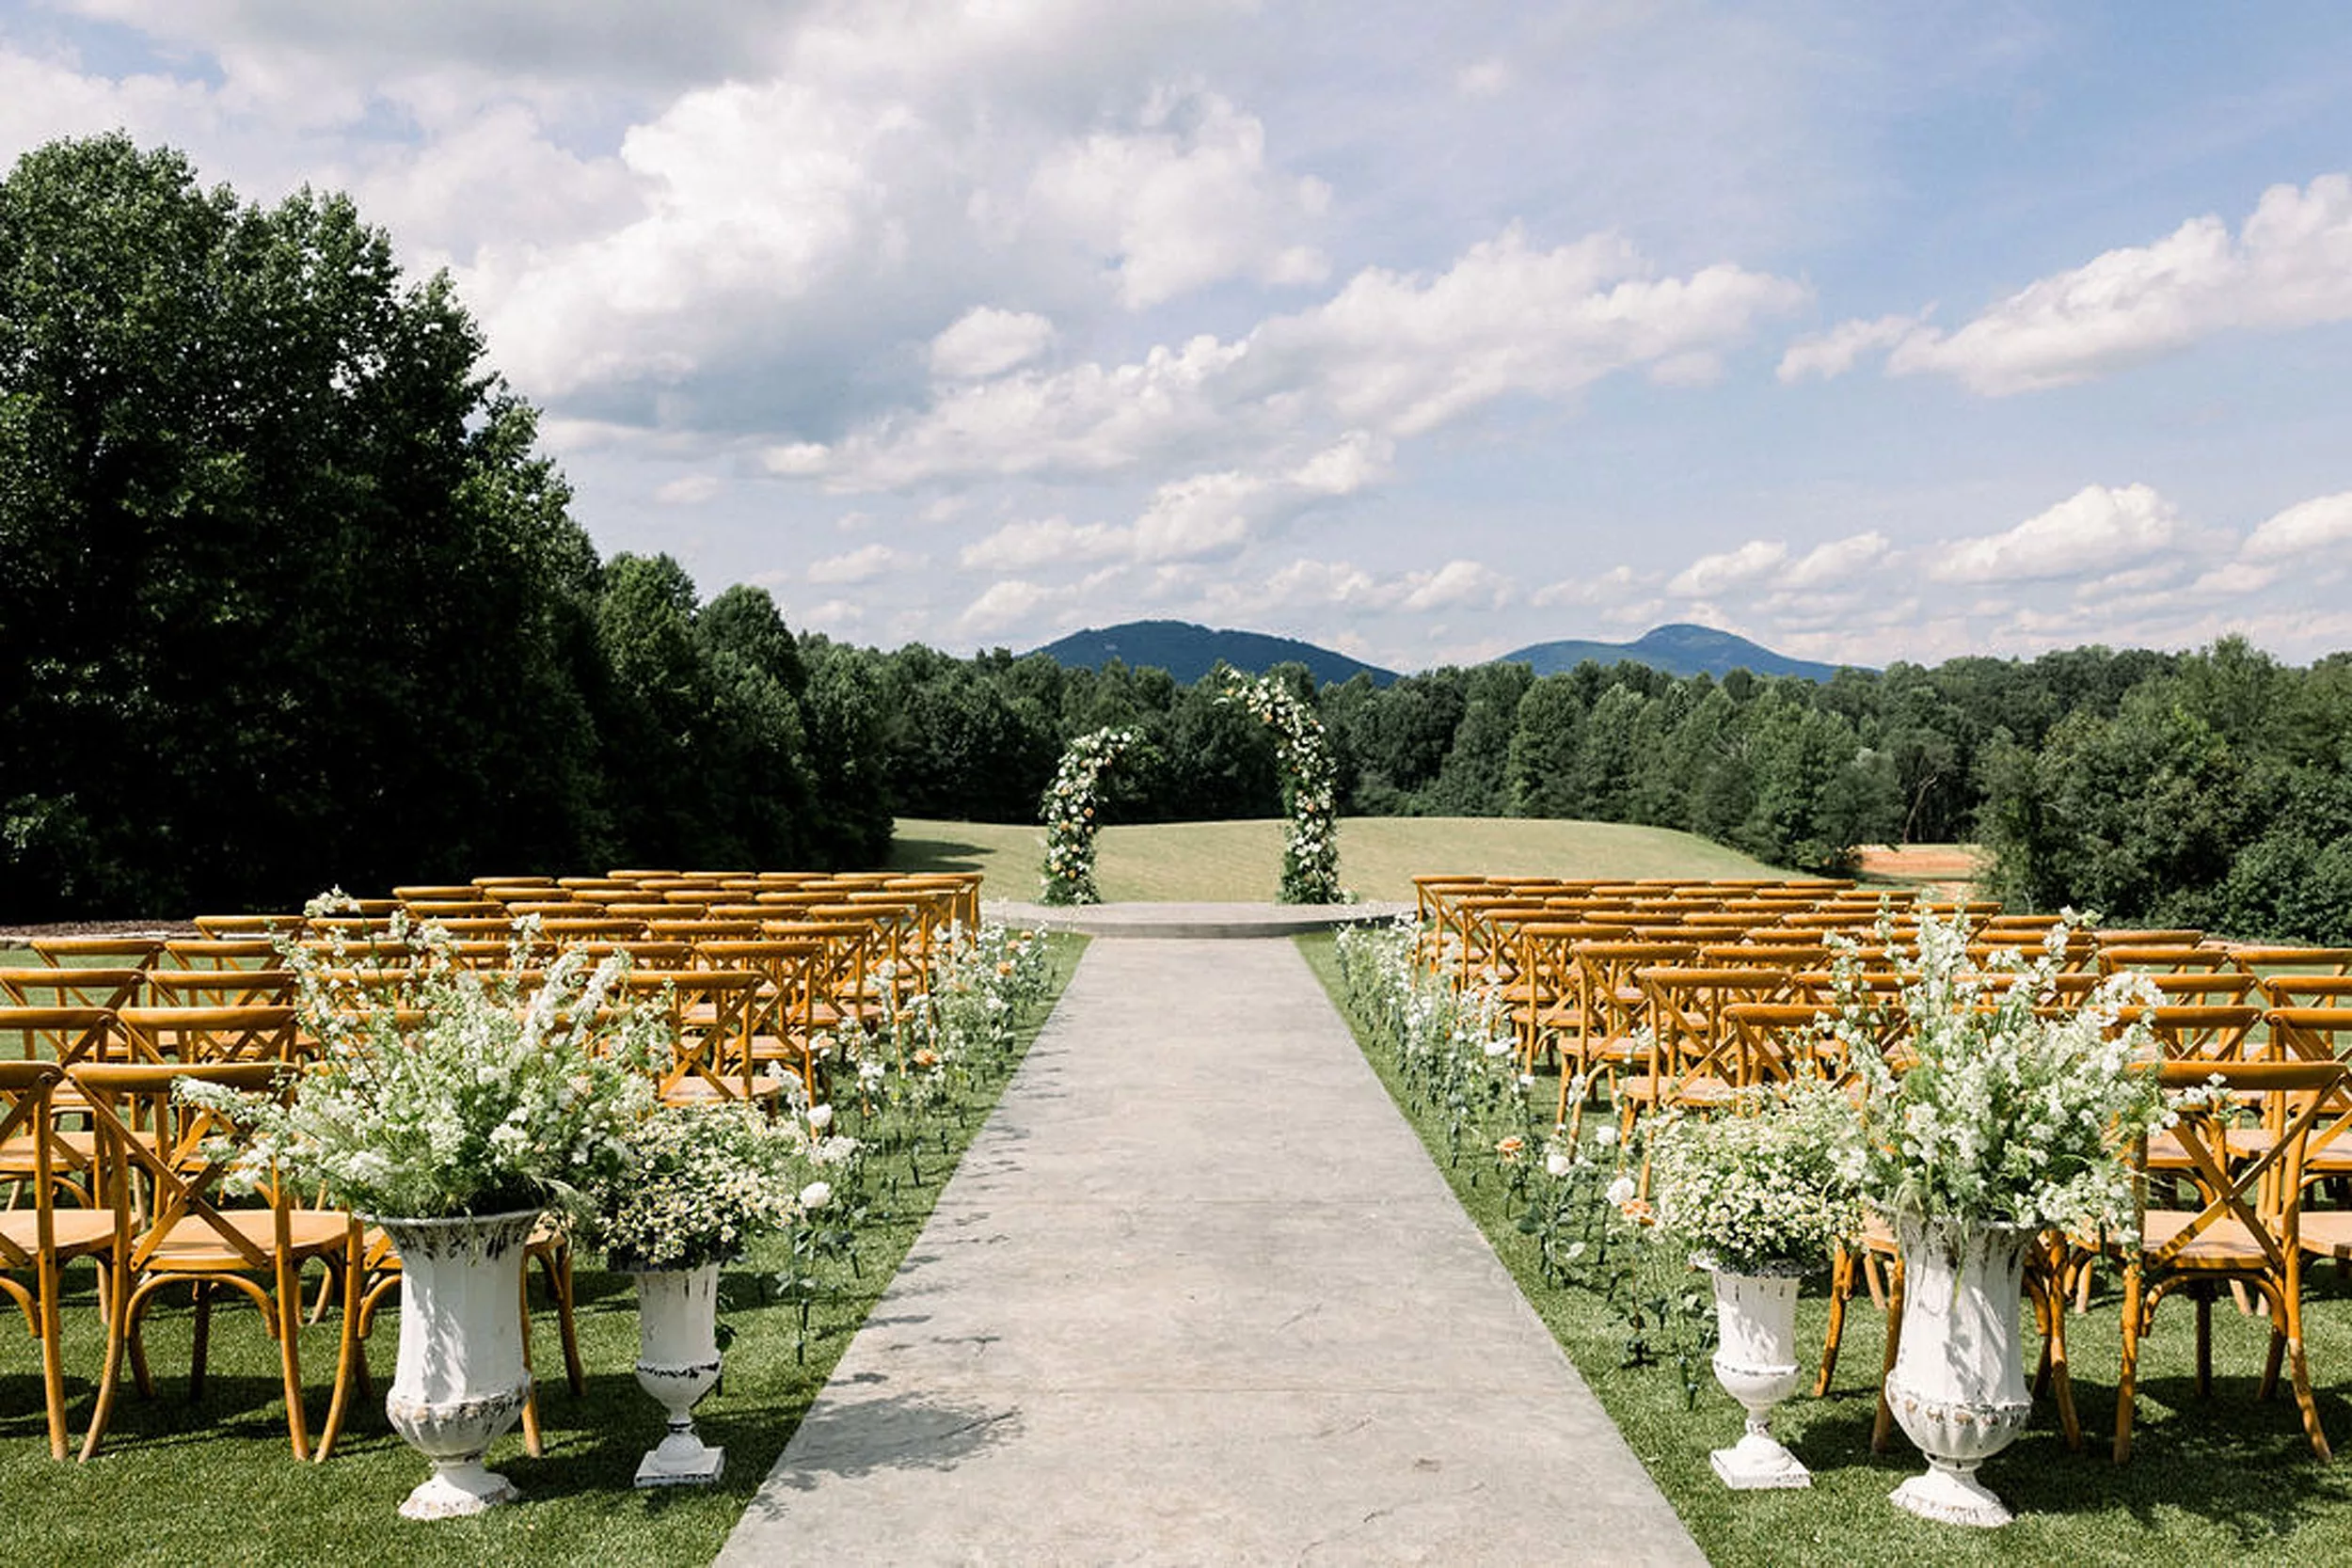 Details of a wedding ceremony set up in a lawn with a floral arch with wooden chairs